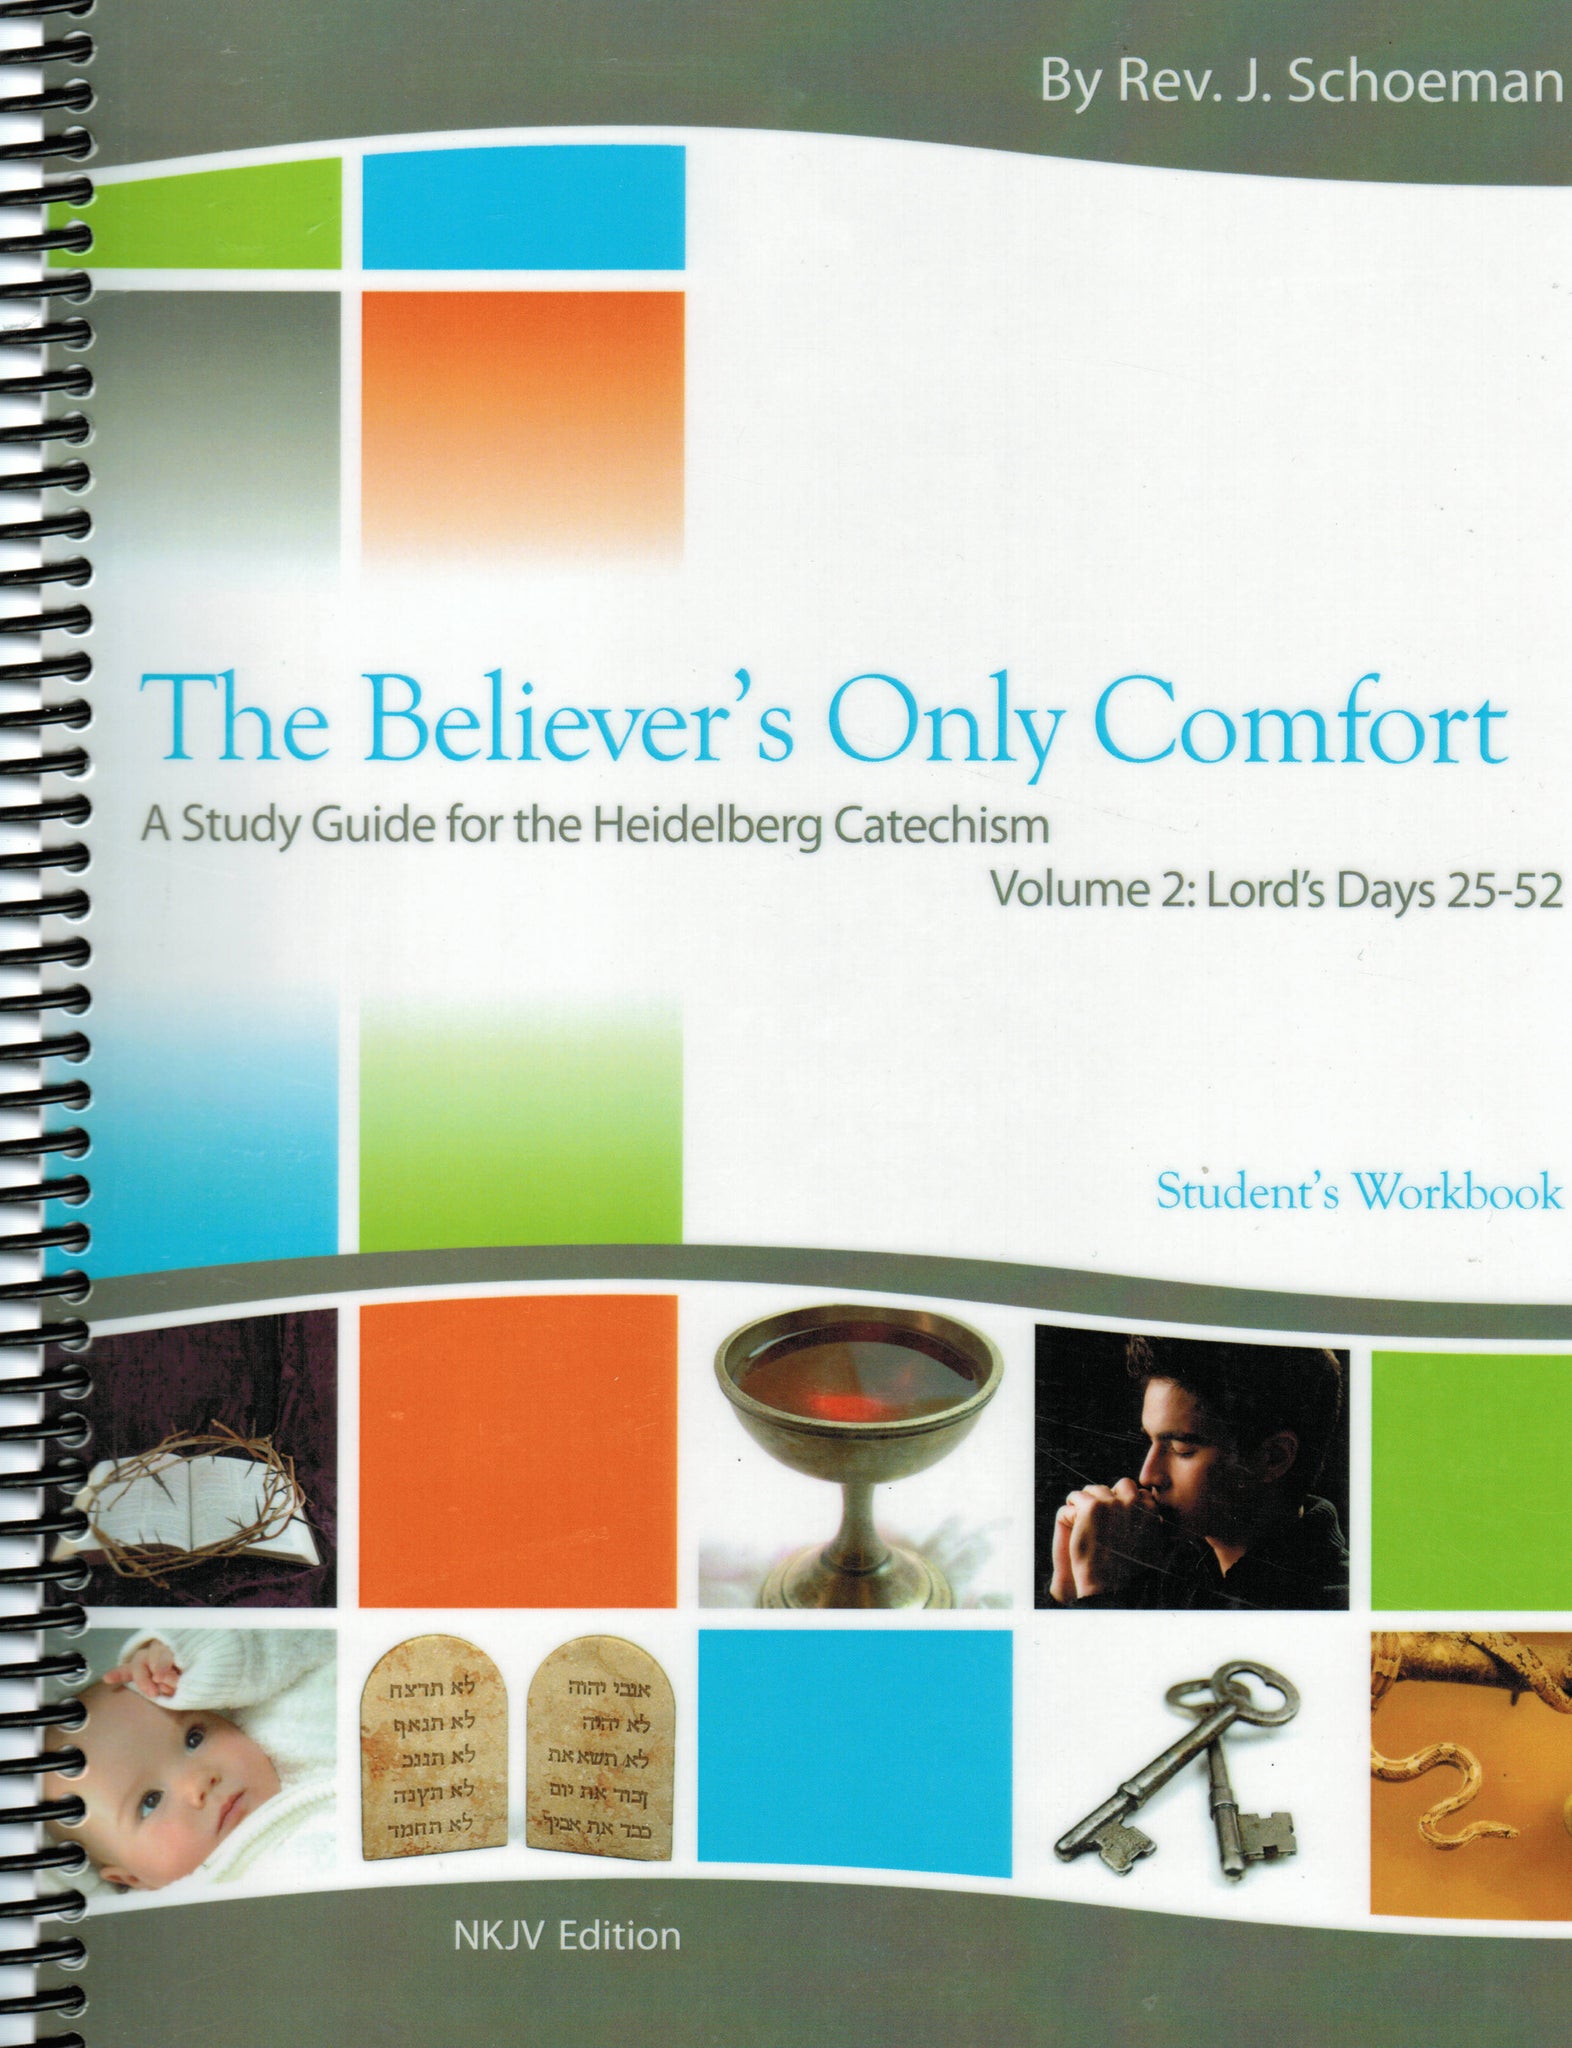 The Believer's Only Comfort: A Study Guide for the Heidelberg Catechism [NKJV] - Student's Workbook Volume 2 (LD 25-52)